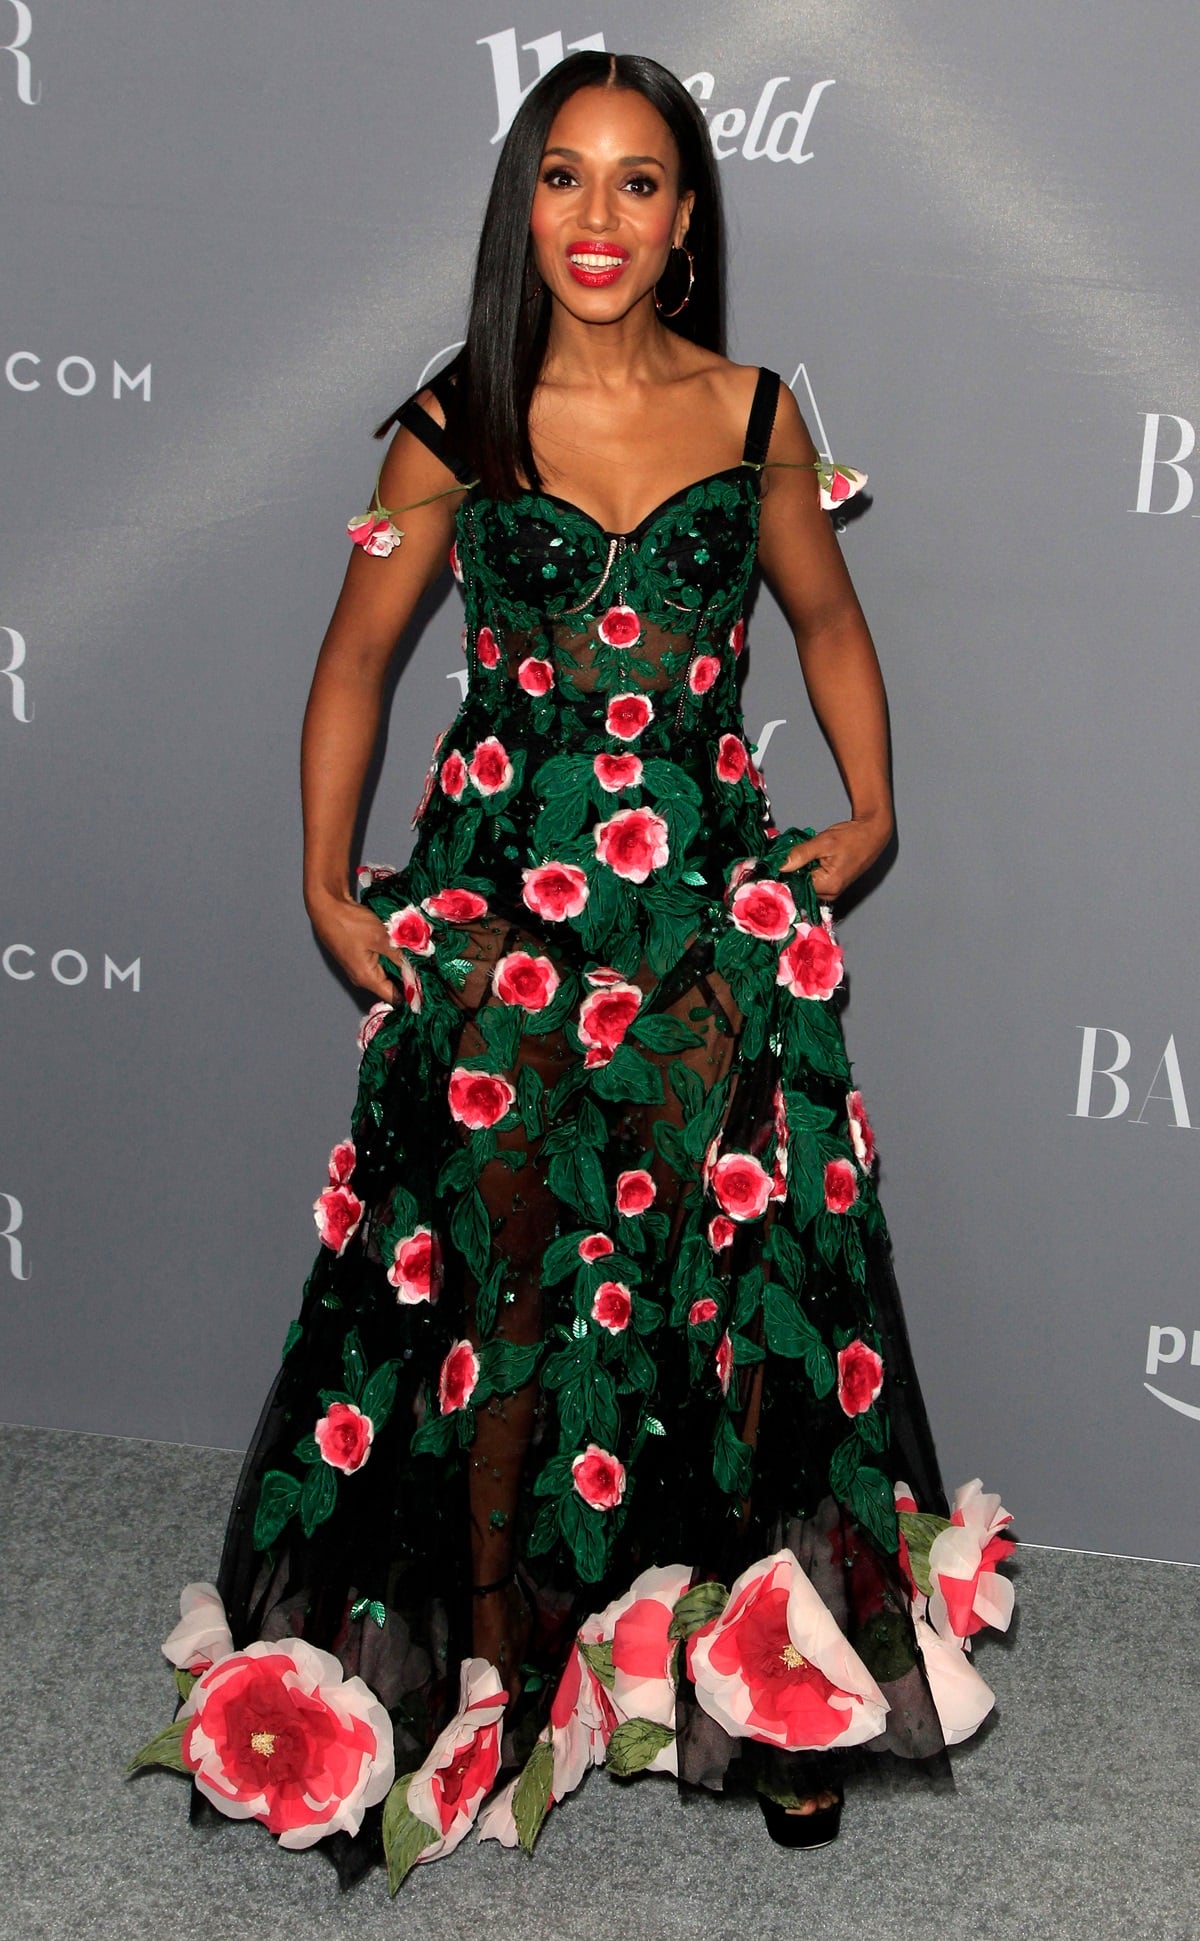 Kerry Washington received the 'Spotlight Award' at the Costume Designers Guild Awards, looking mesmerizing in a black floral appliqué gown from Dolce & Gabbana's Spring 2018 collection, complemented by gold accents and a bold red lip